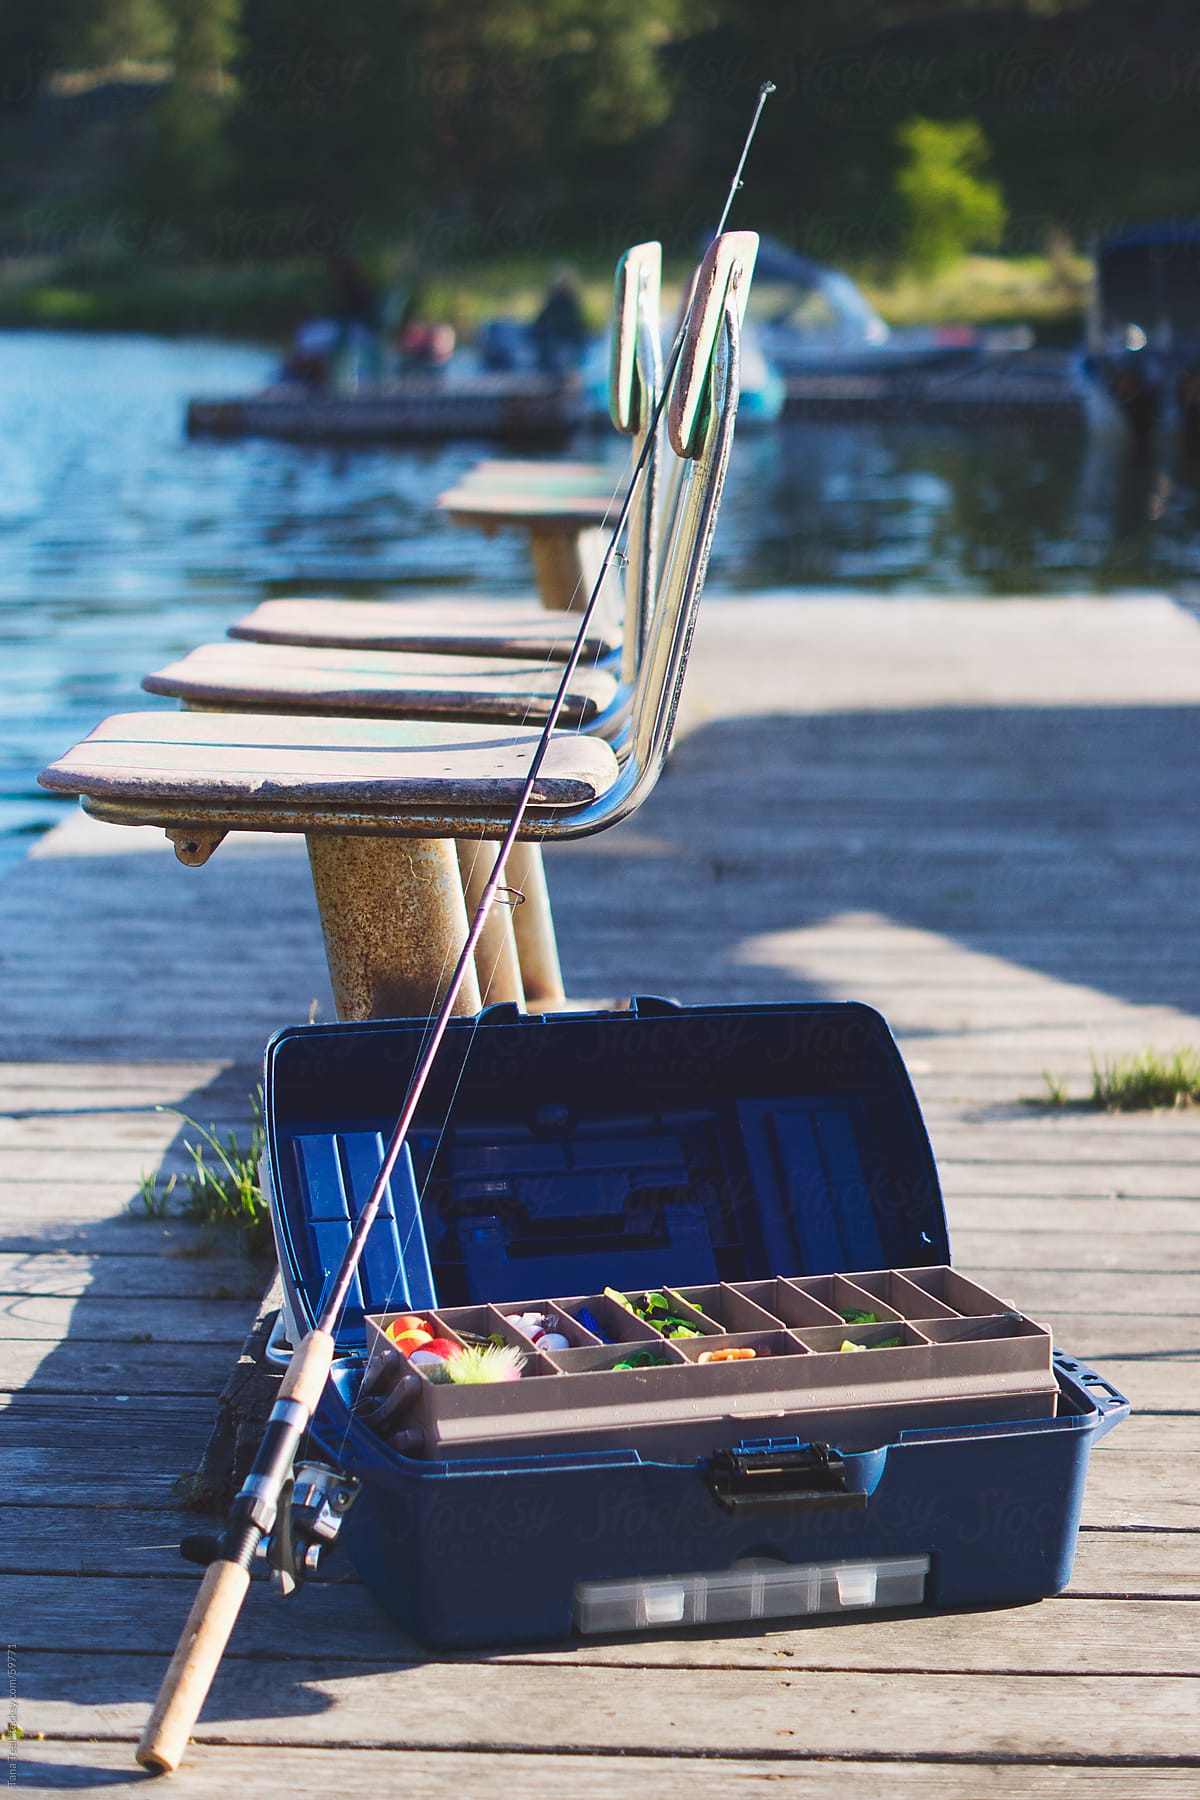 A Fishing Pole Leans Against A Tackle Box Next To Chairs On A Fishing Dock  by Stocksy Contributor Tana Teel - Stocksy